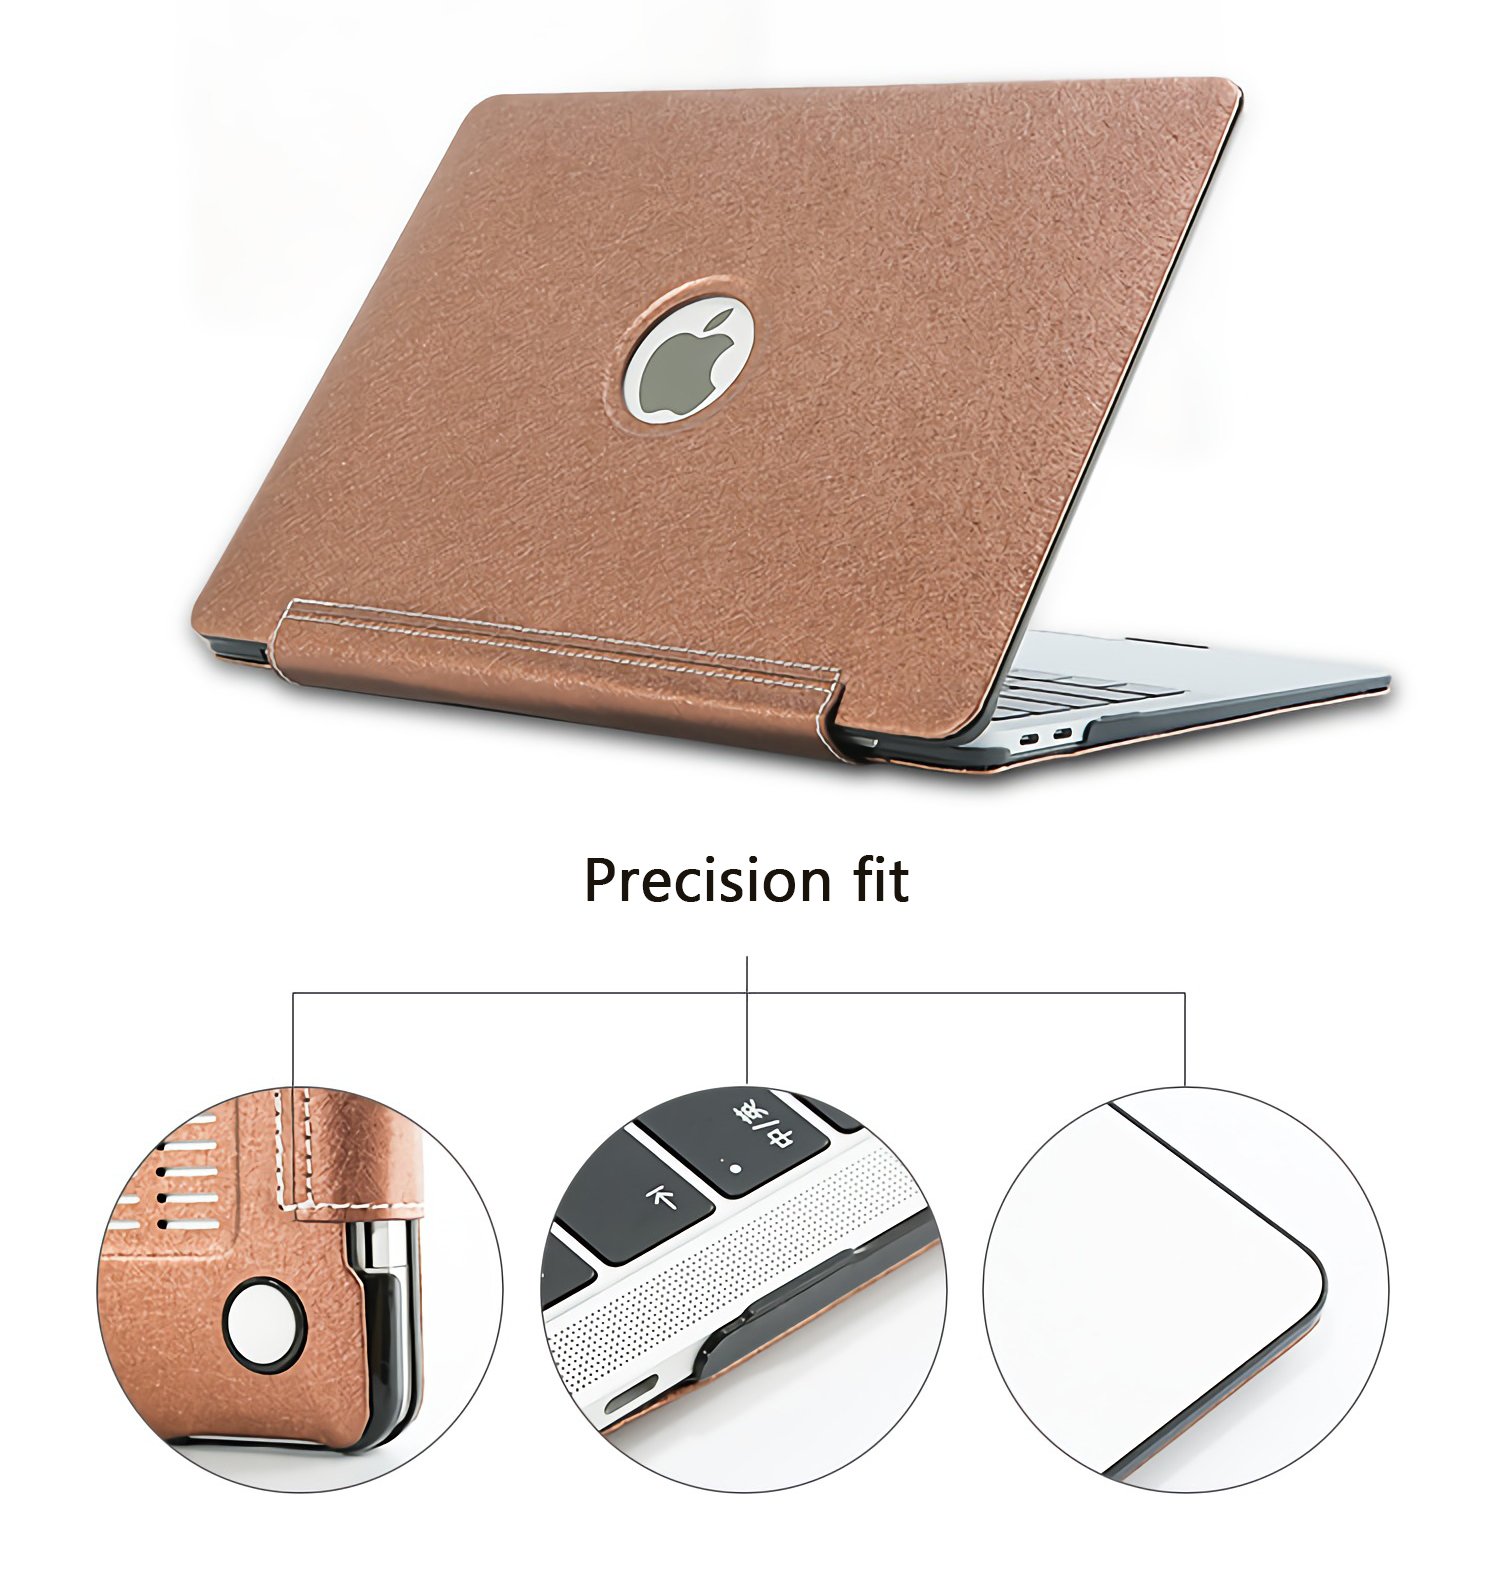 13.3 inch PU Leather Laptop Cover Black / Brown Laptop Sleeve Bag Laptop Case For MacBook Air / Pro